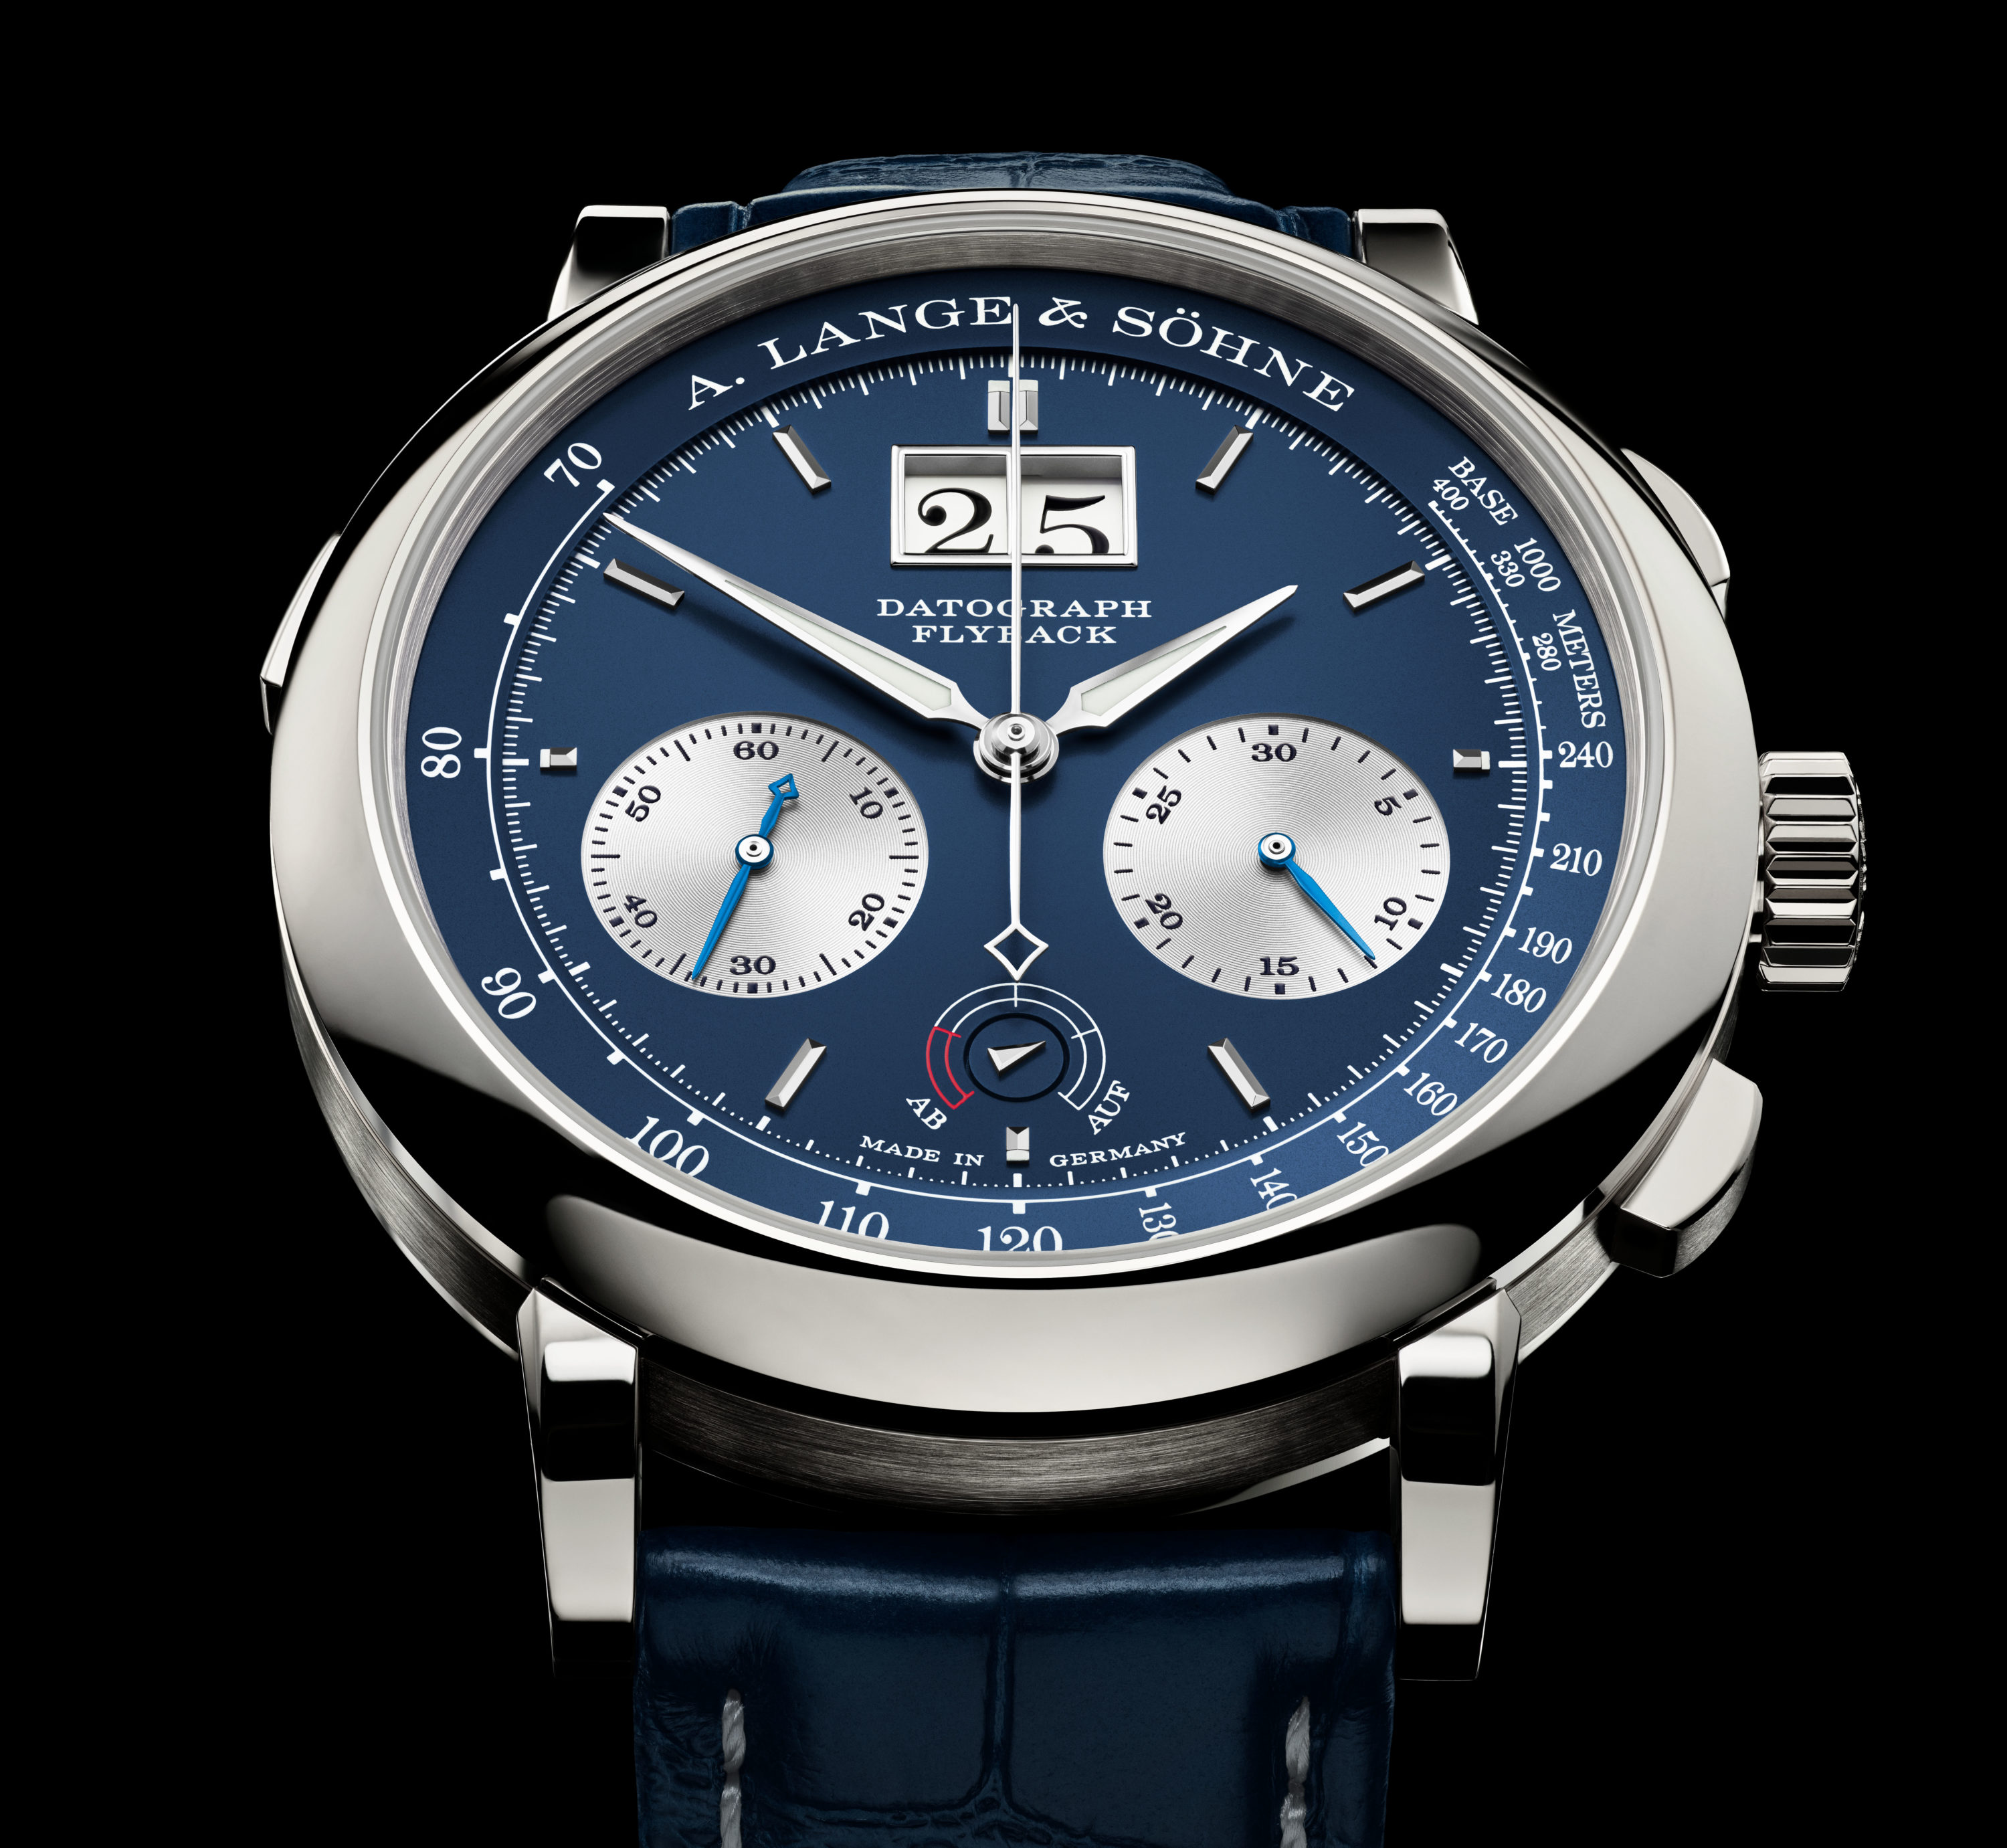 Celebrating the Art of Chronograph: A. Lange & Söhne Launches Datograph Up/Down at Watches and Wonders 2024